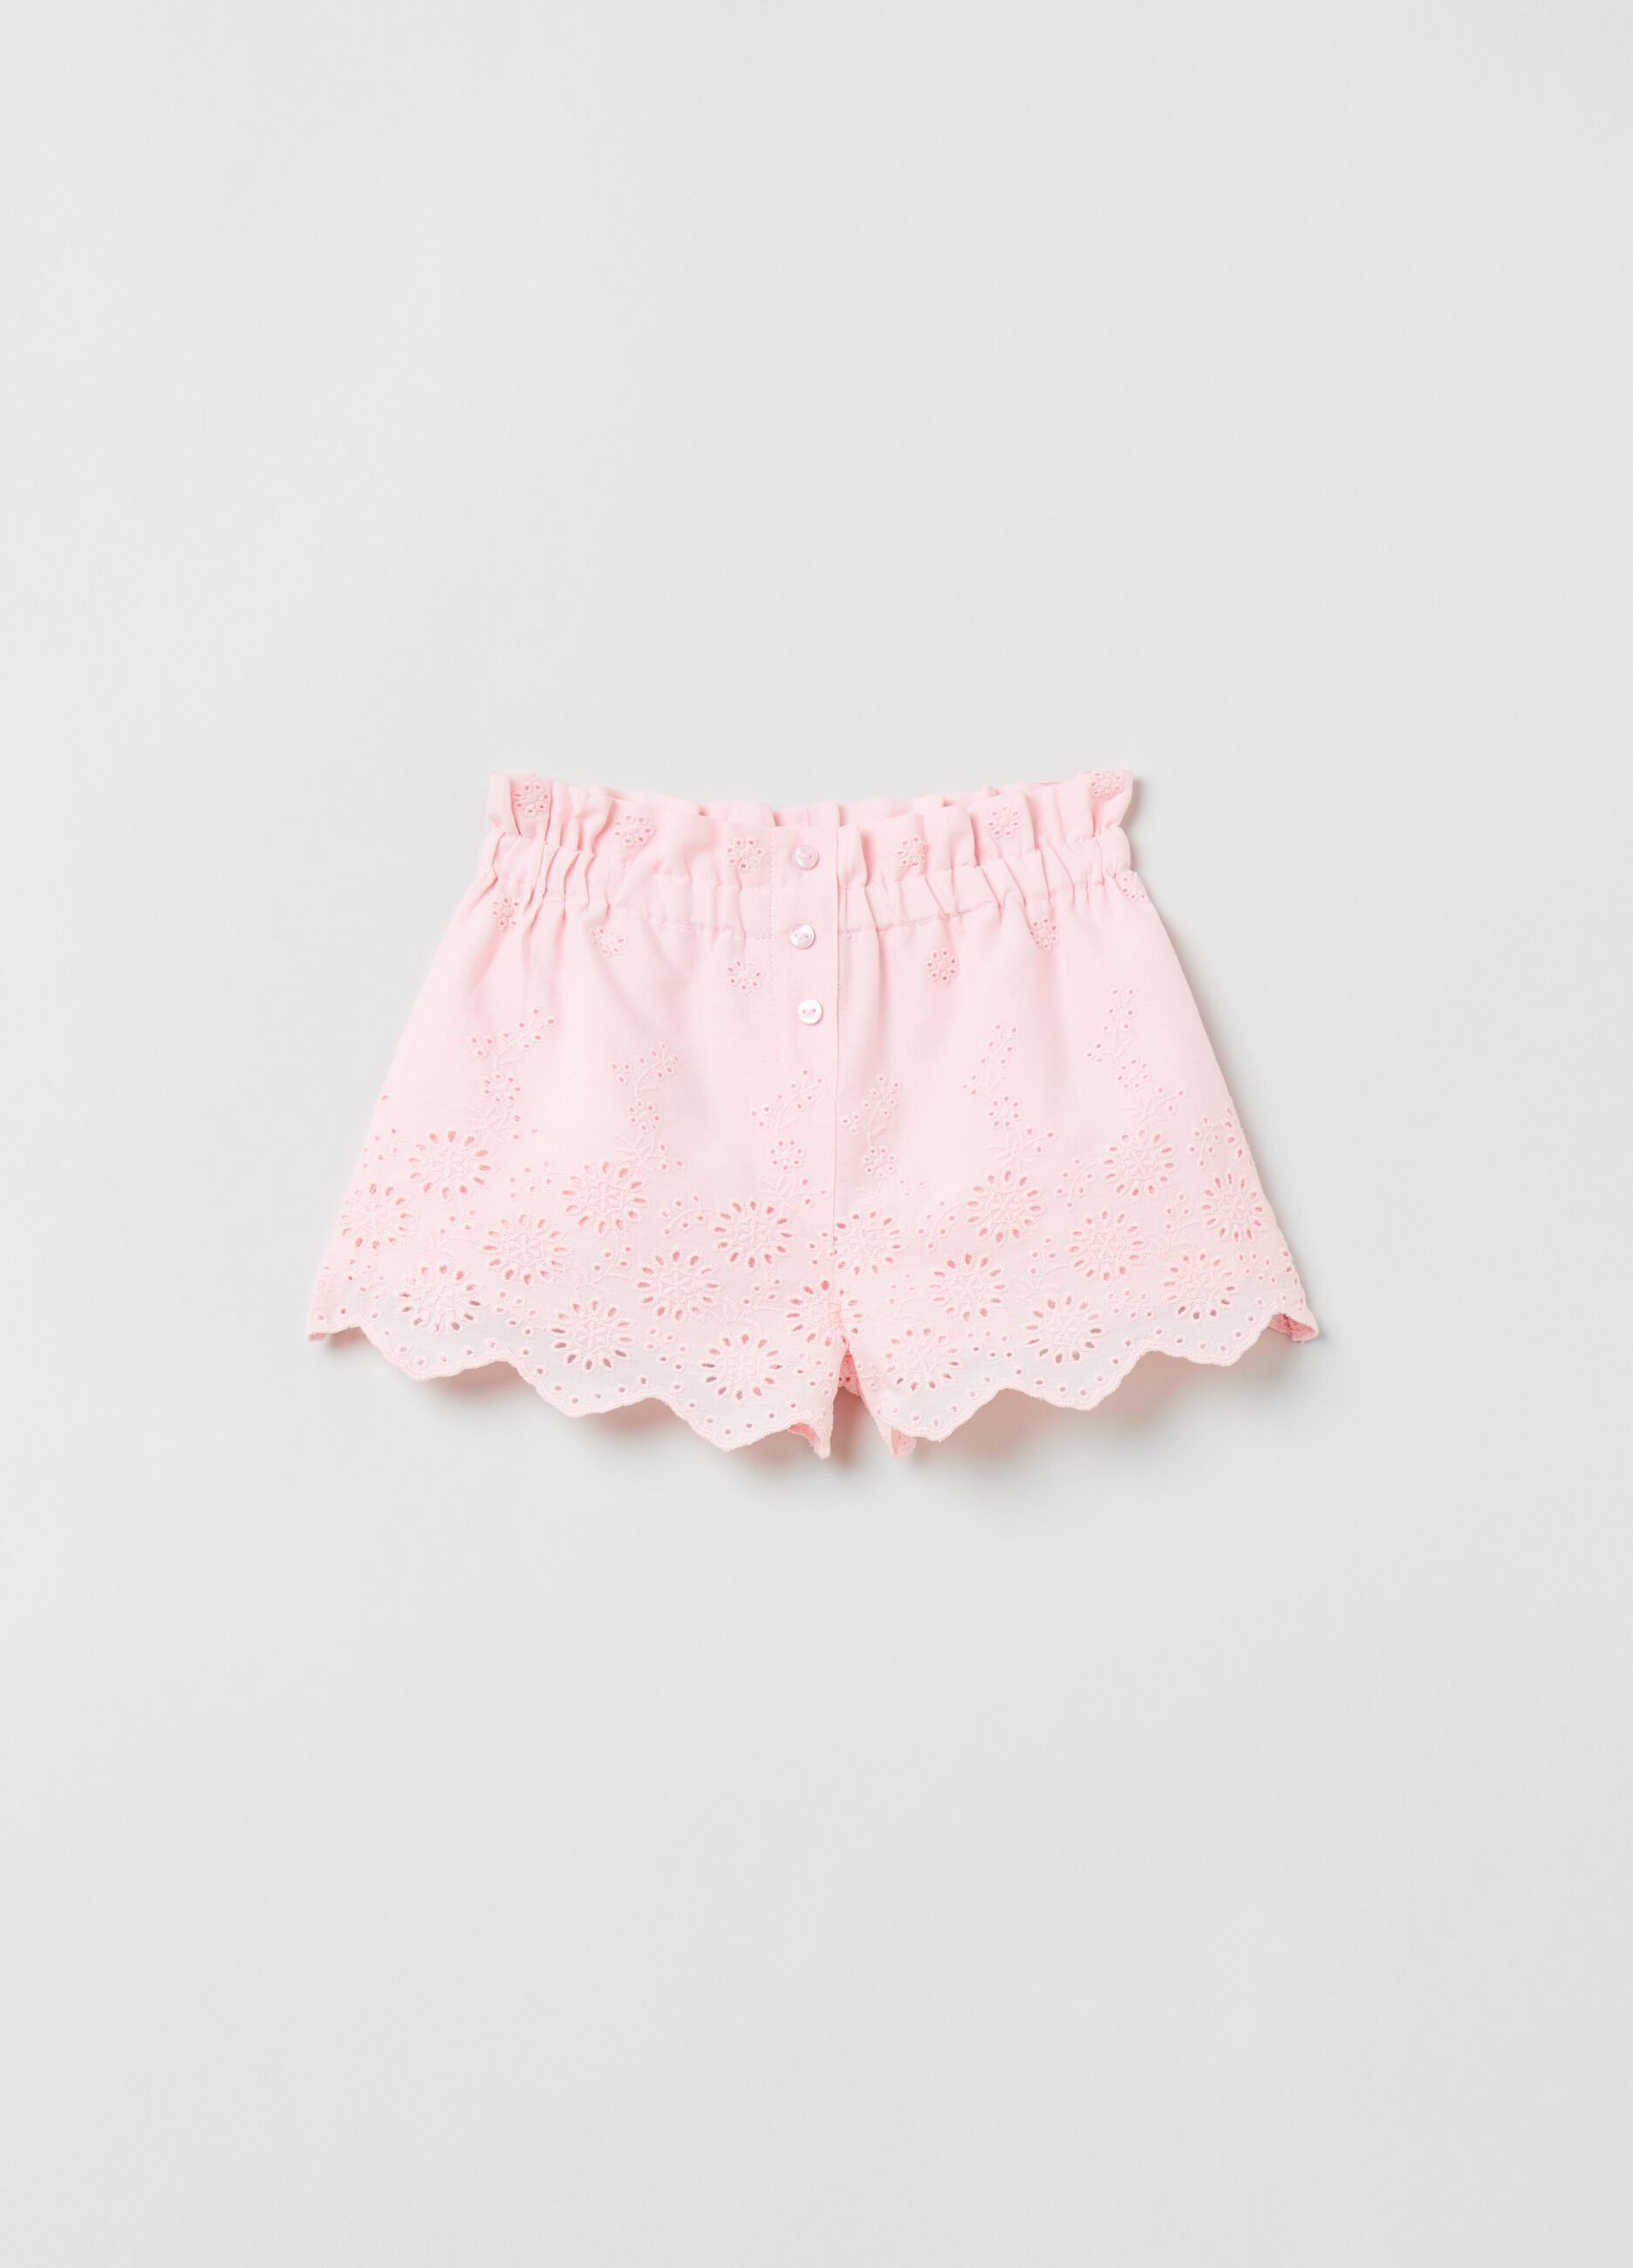 Shorts in broderie anglaise cotton